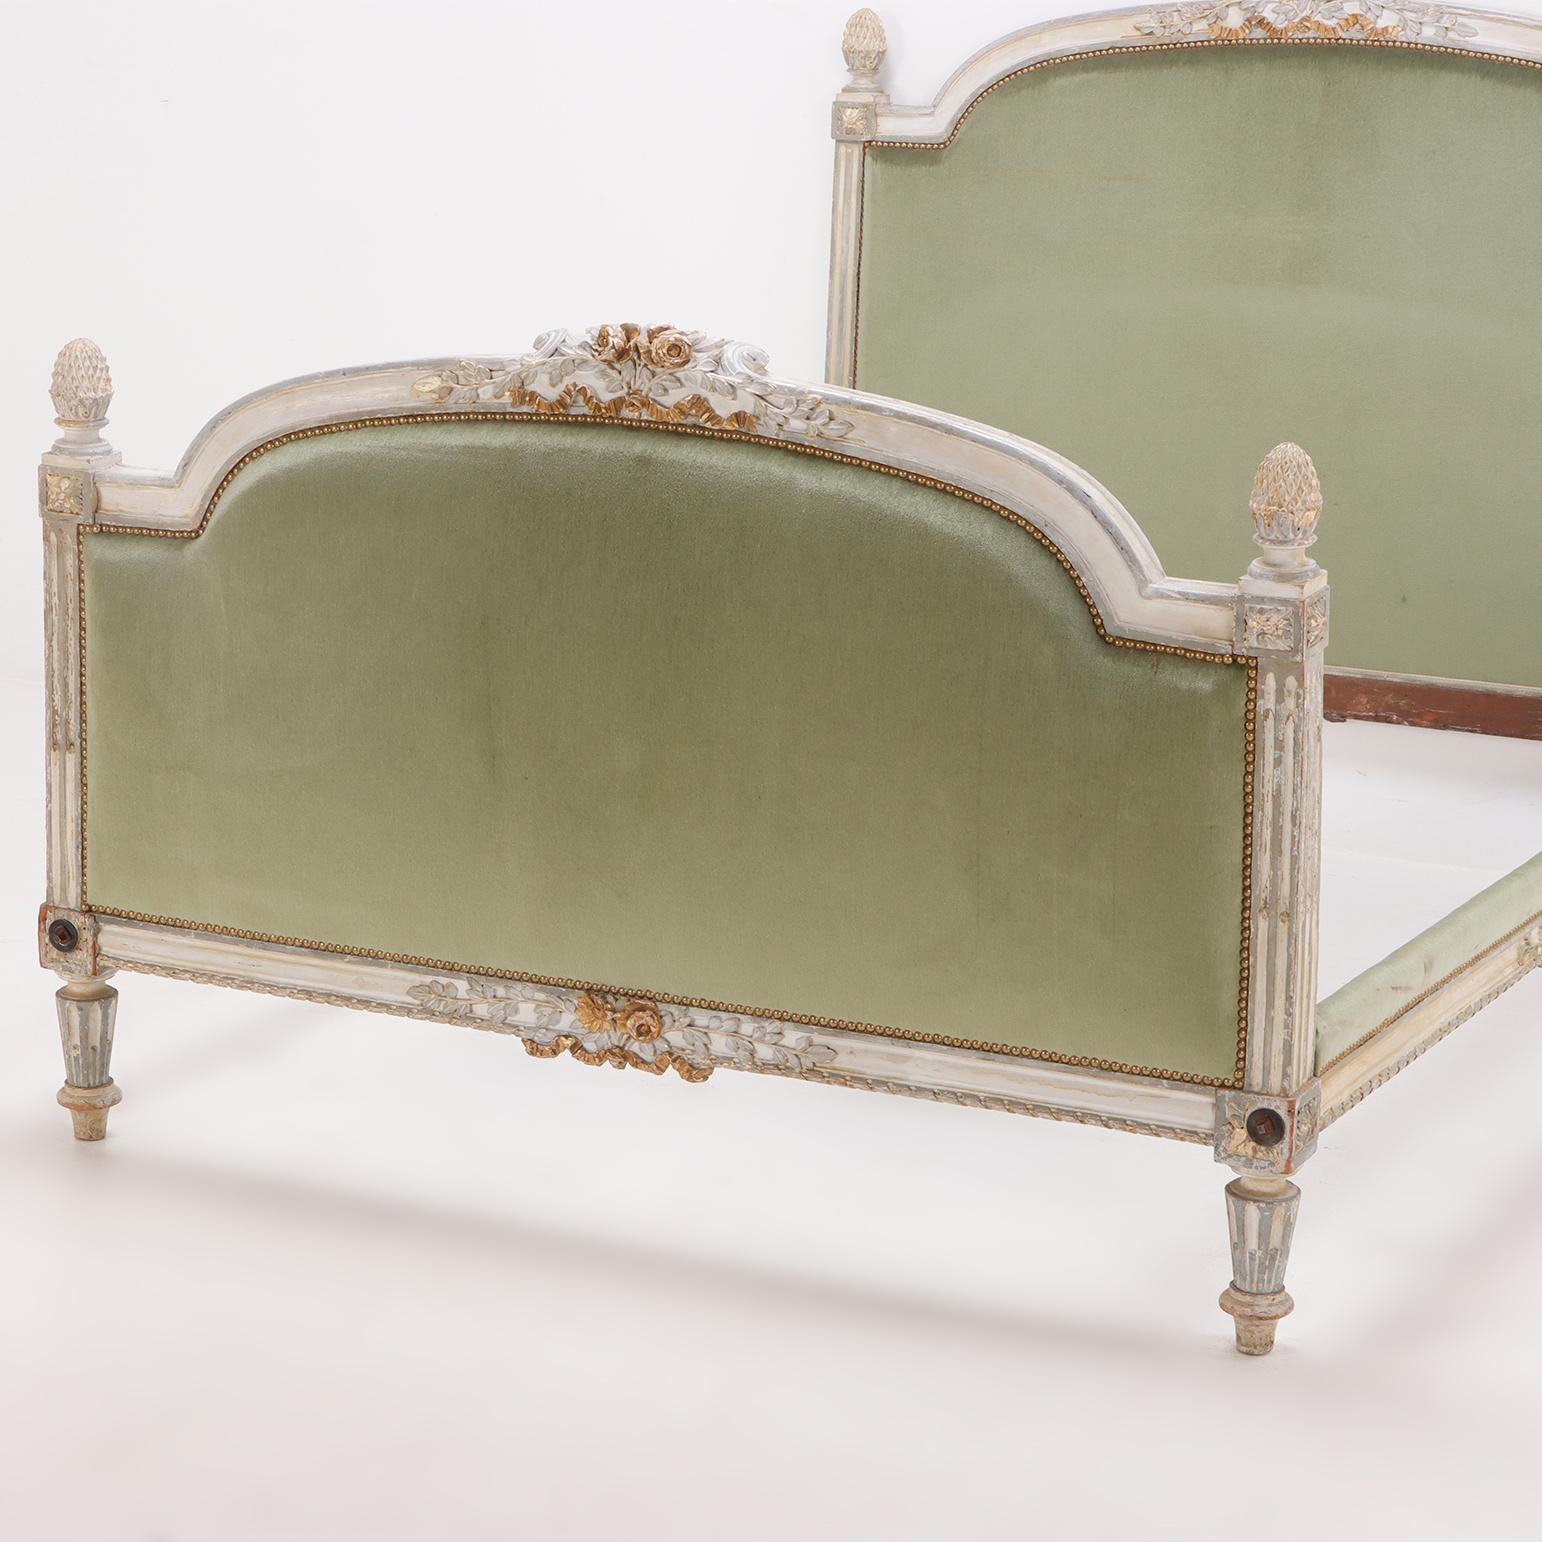 Early 19th Century A painted and carved French Louis XV full size bed circa 1800.